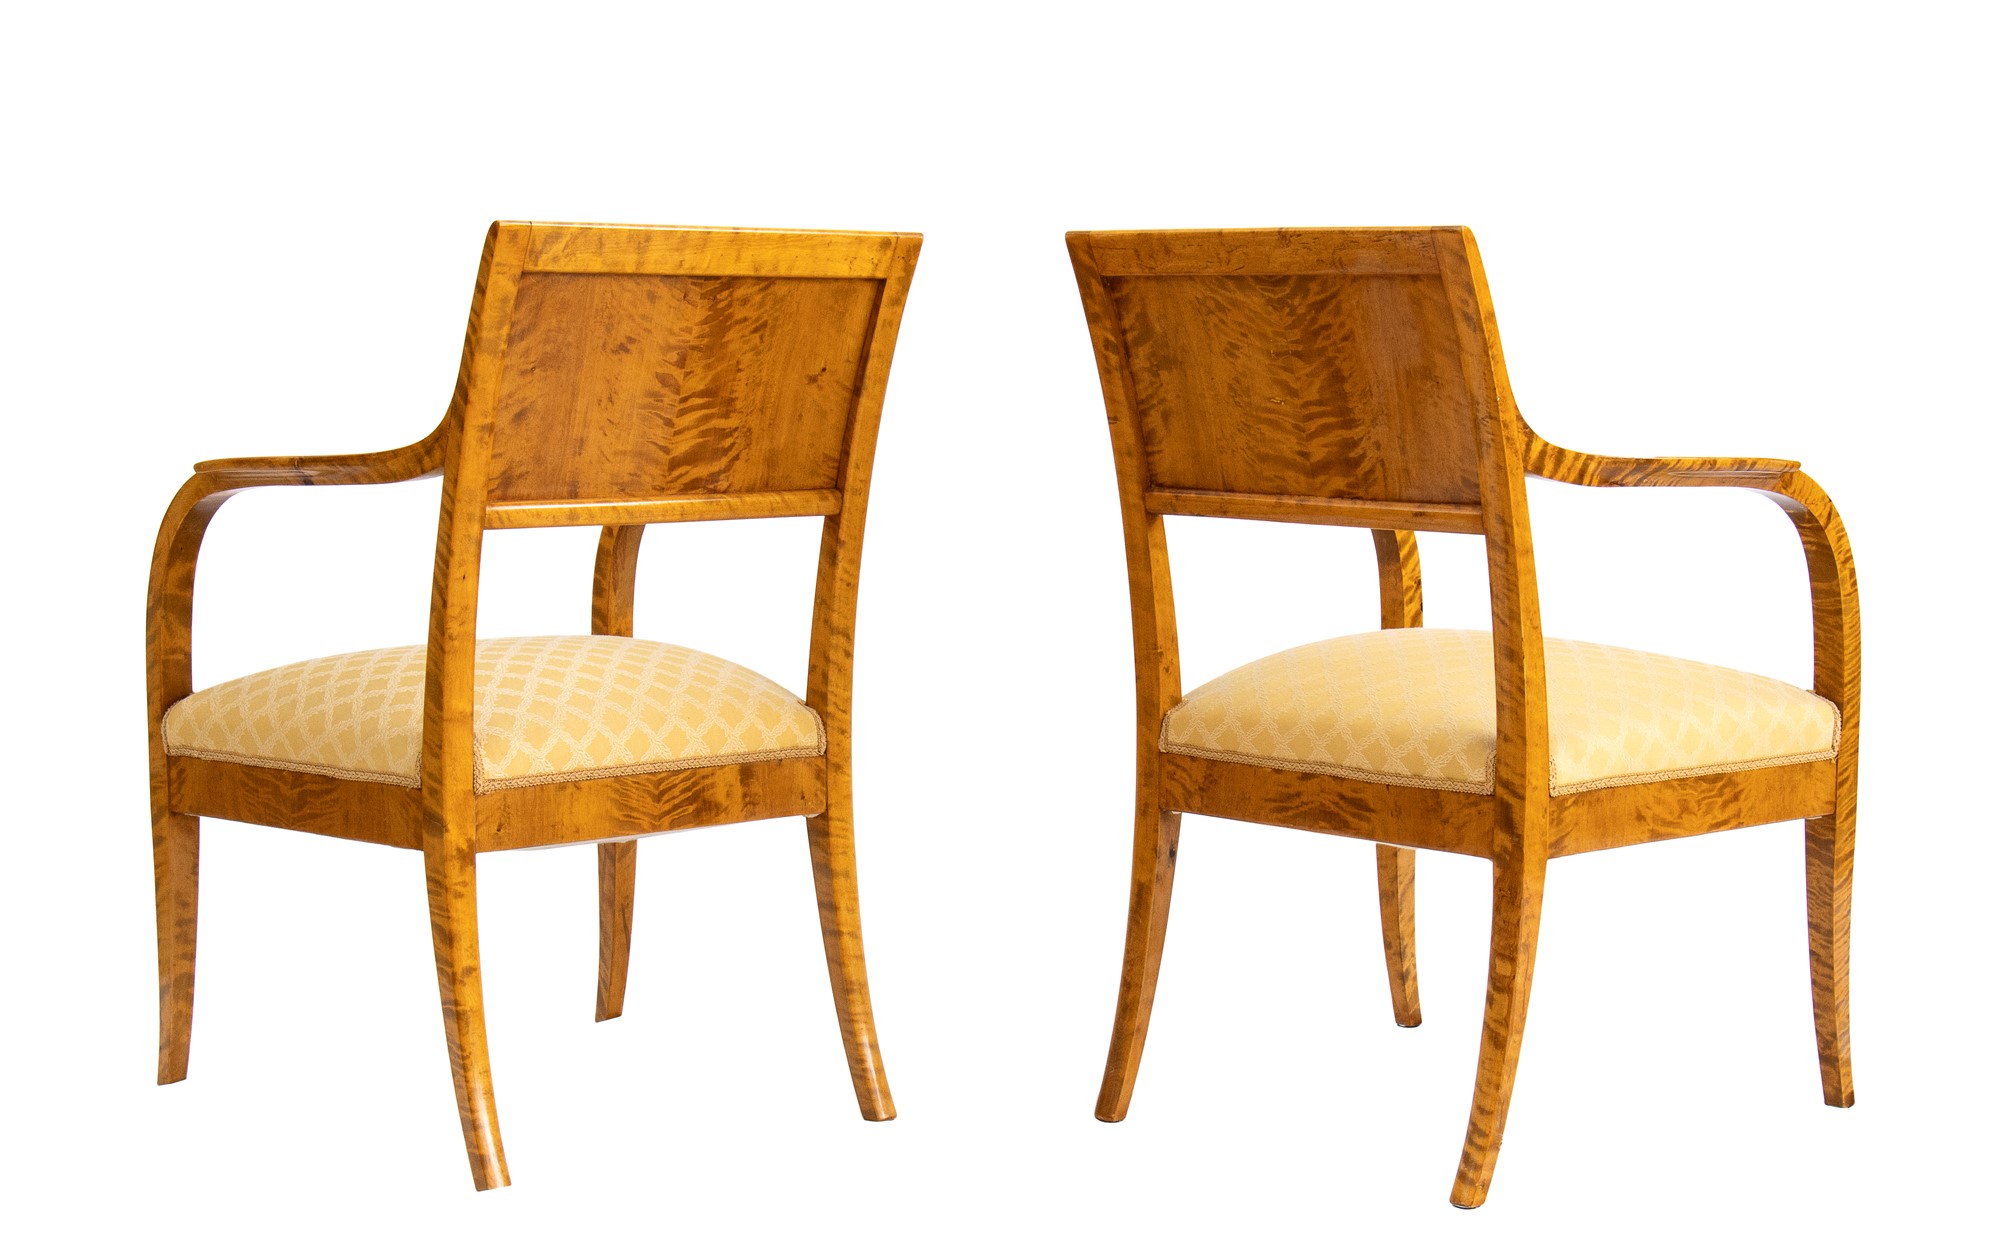 Pair of chairs Biedermeier with back carved in geometric decor with ebonized woods. - Image 15 of 19